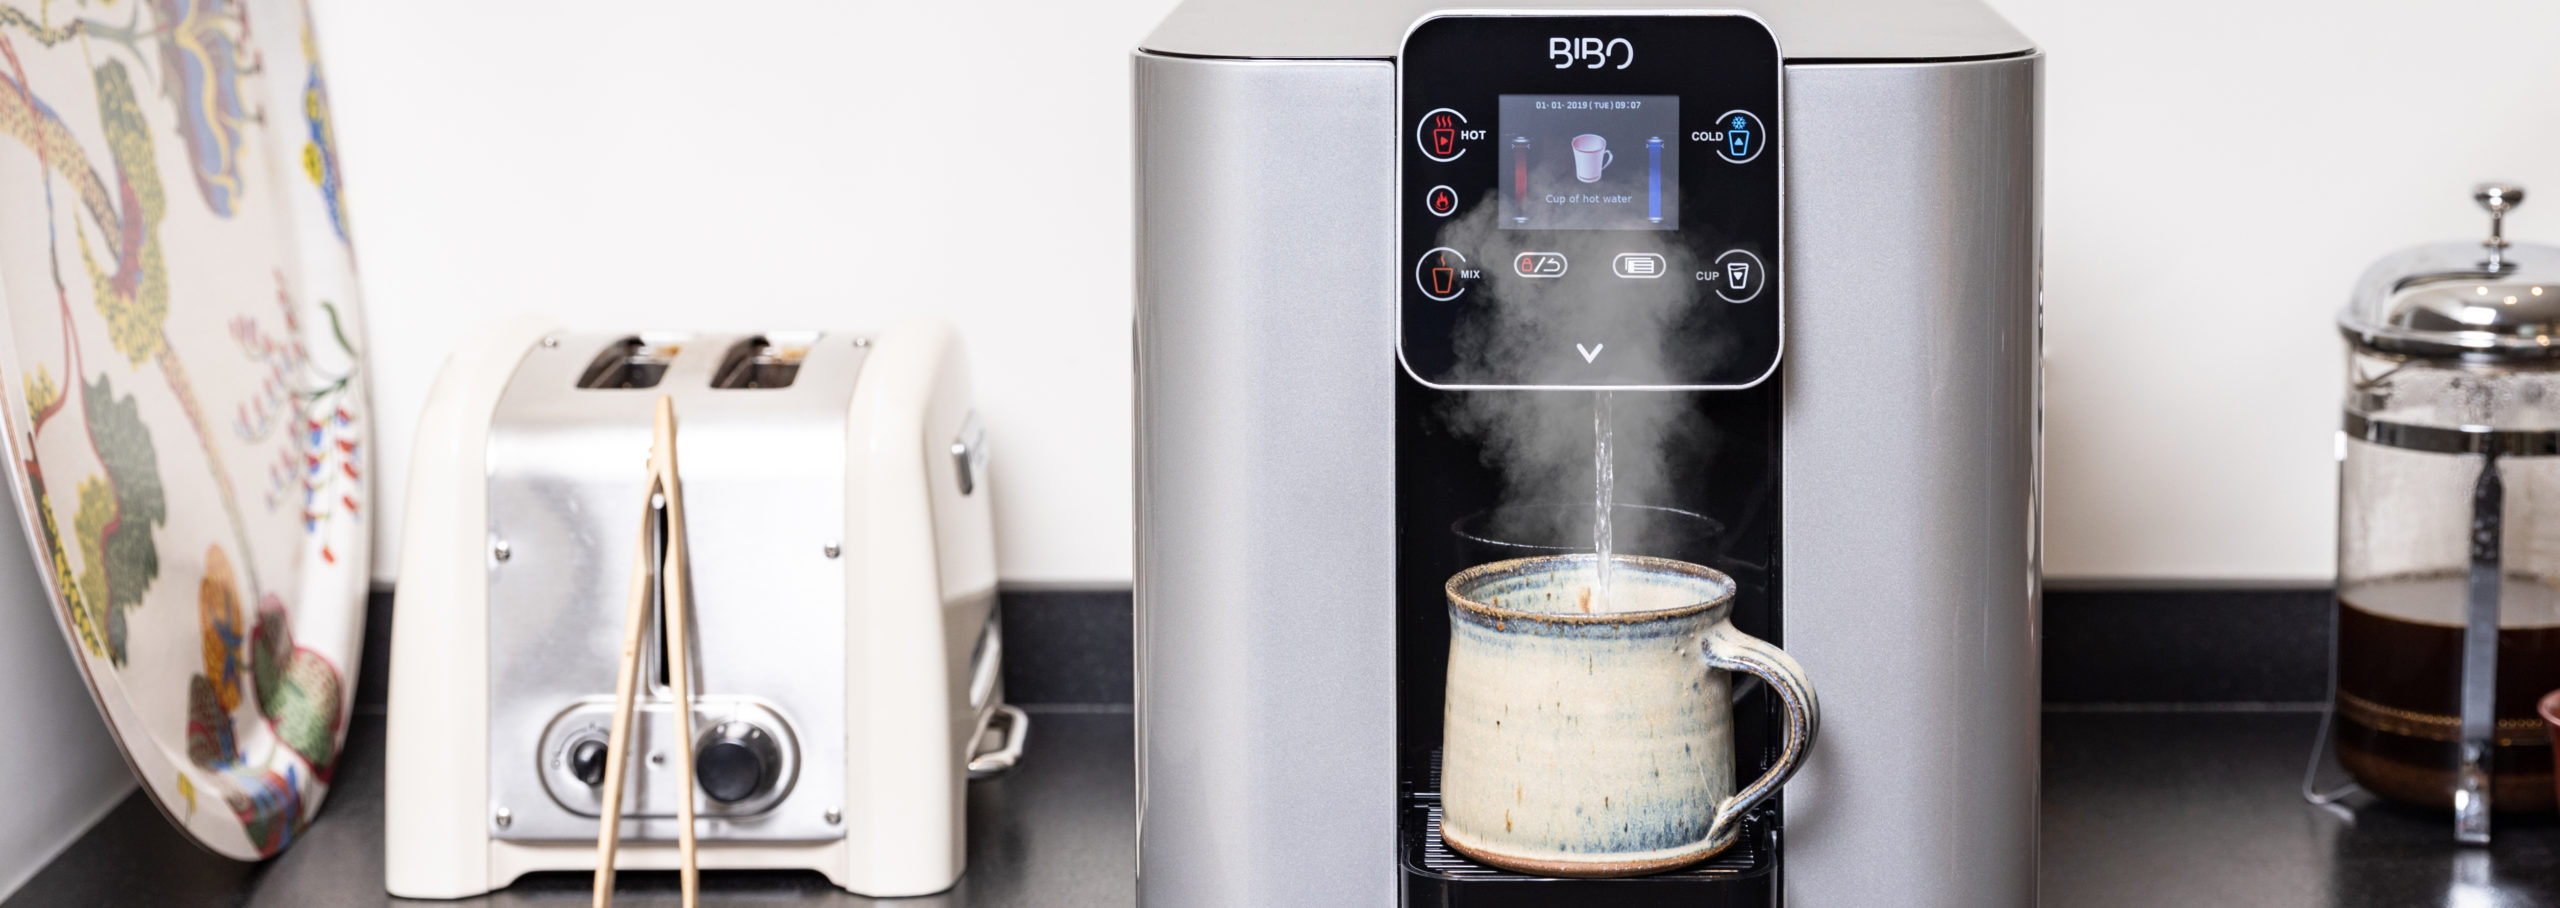 Instant hot water from a BIBO water dispenser